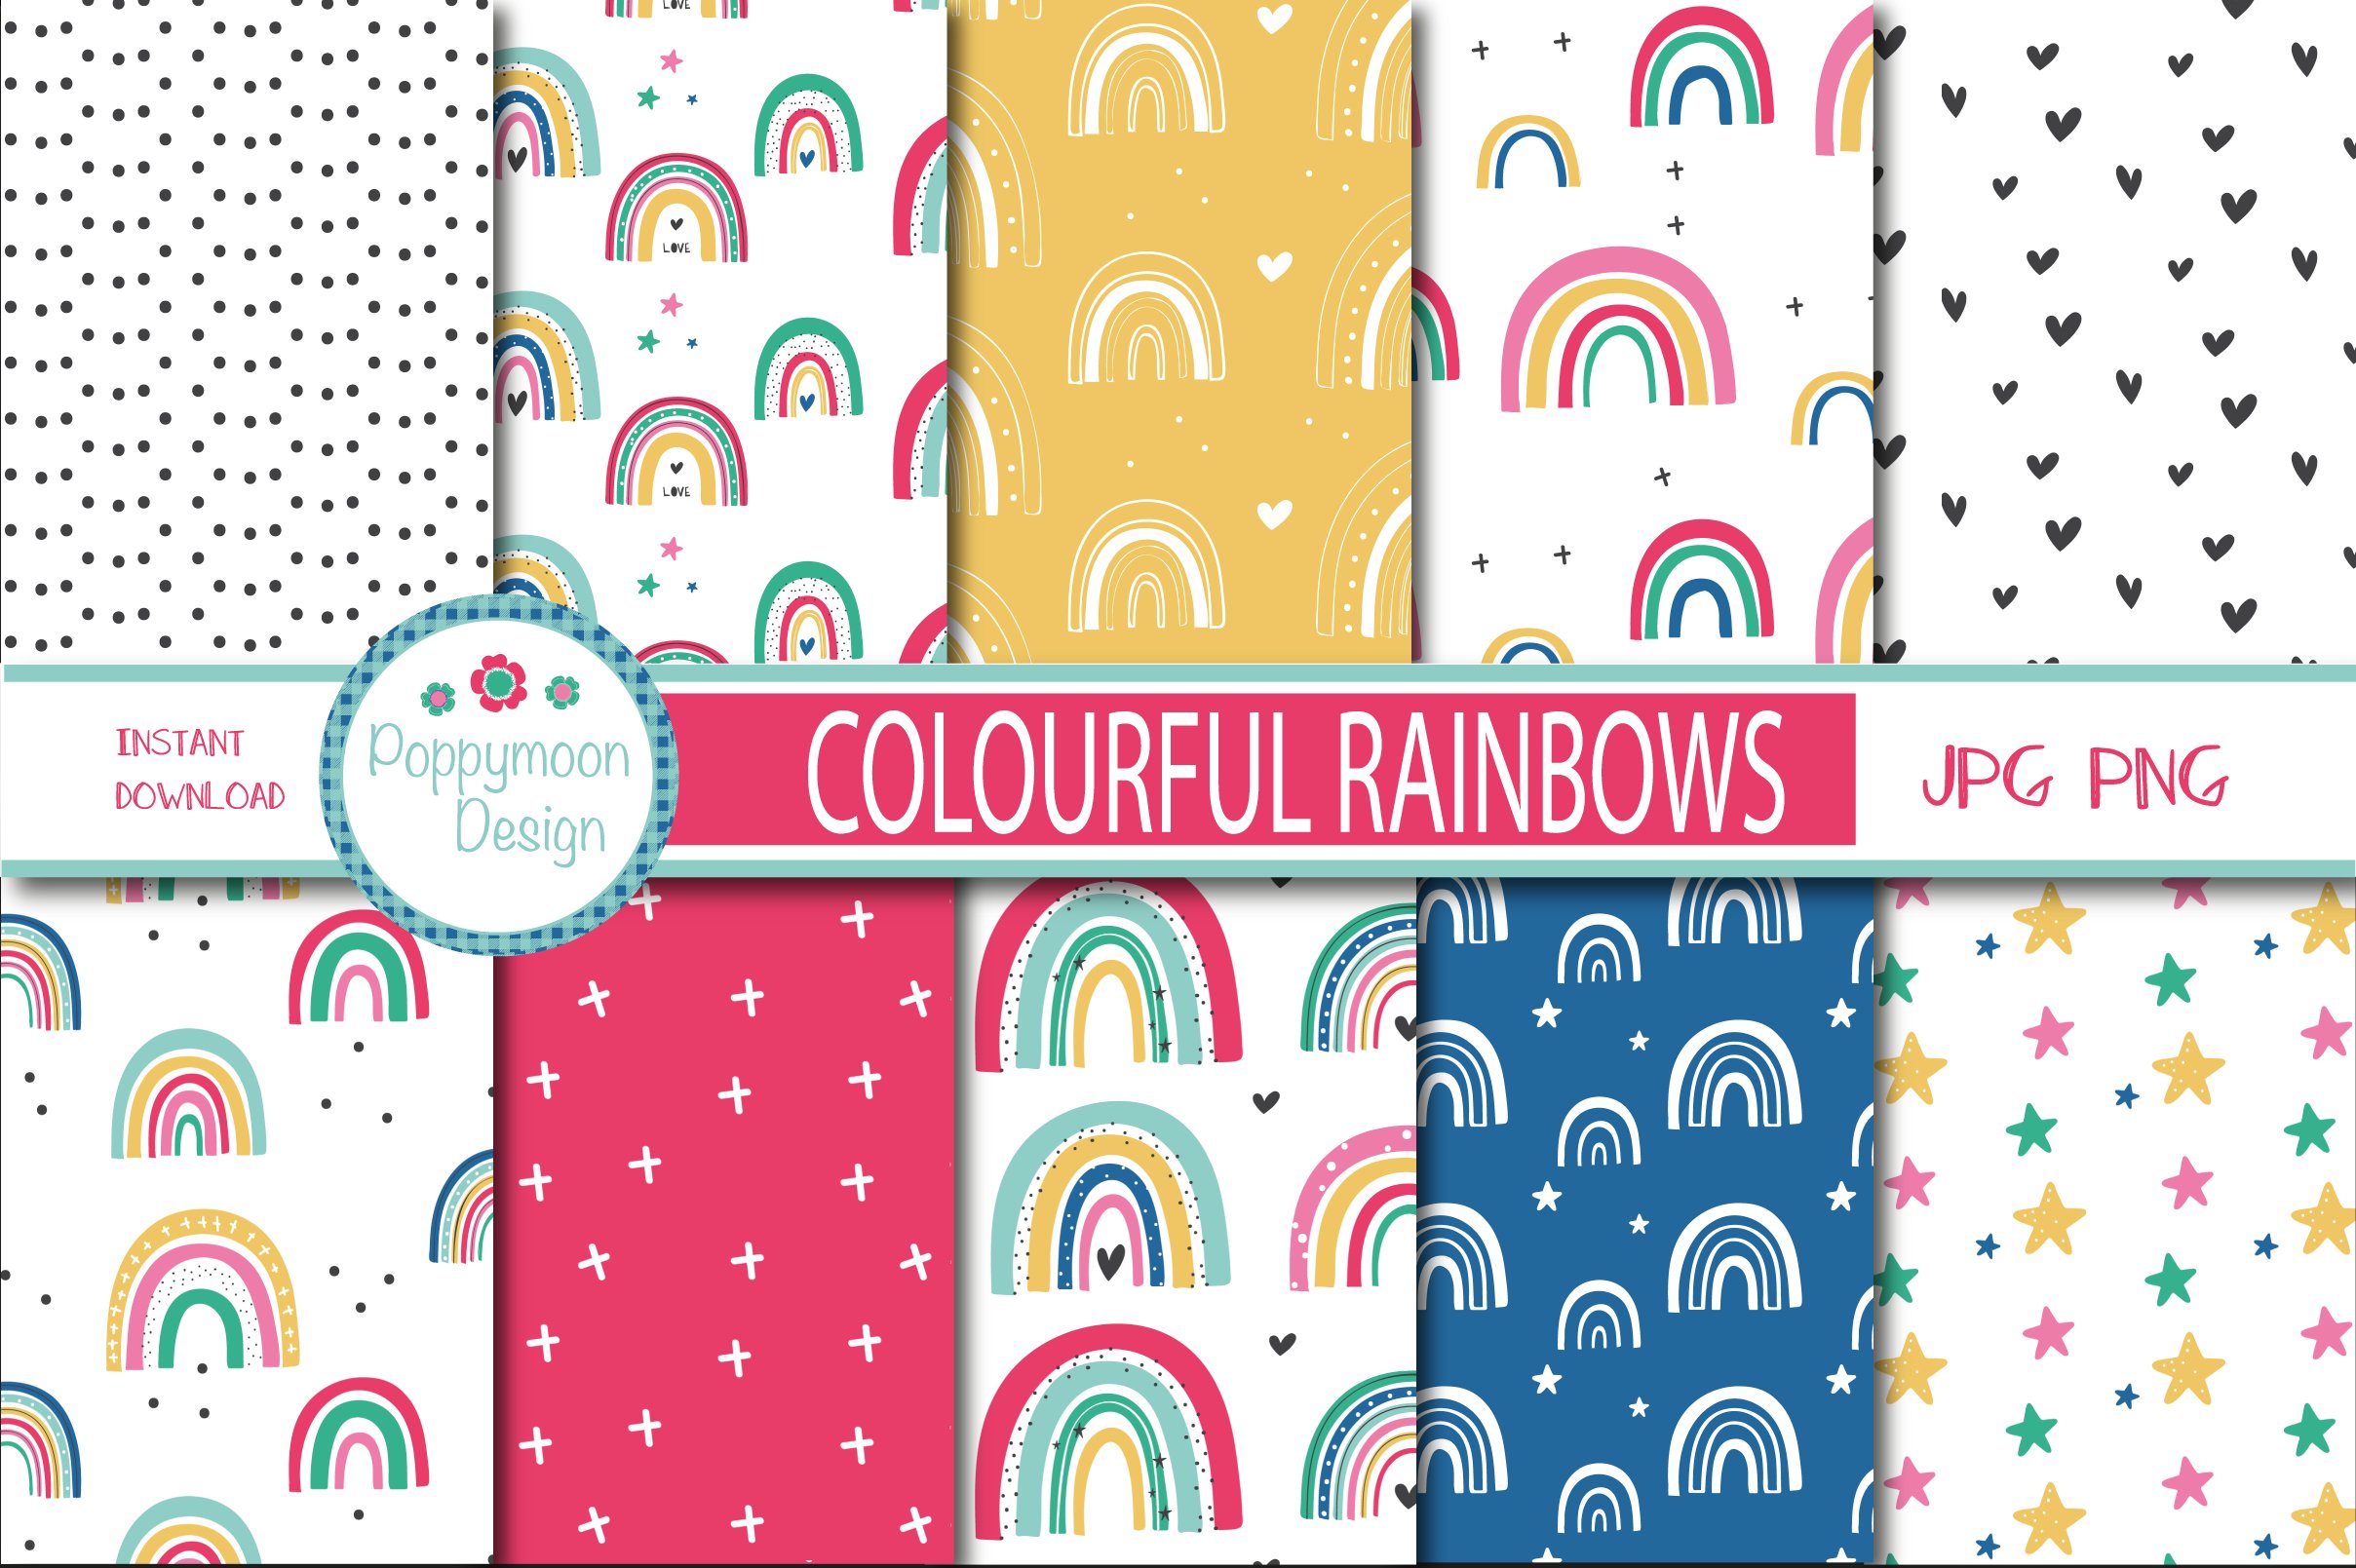 Colourful Rainbow set preview image.